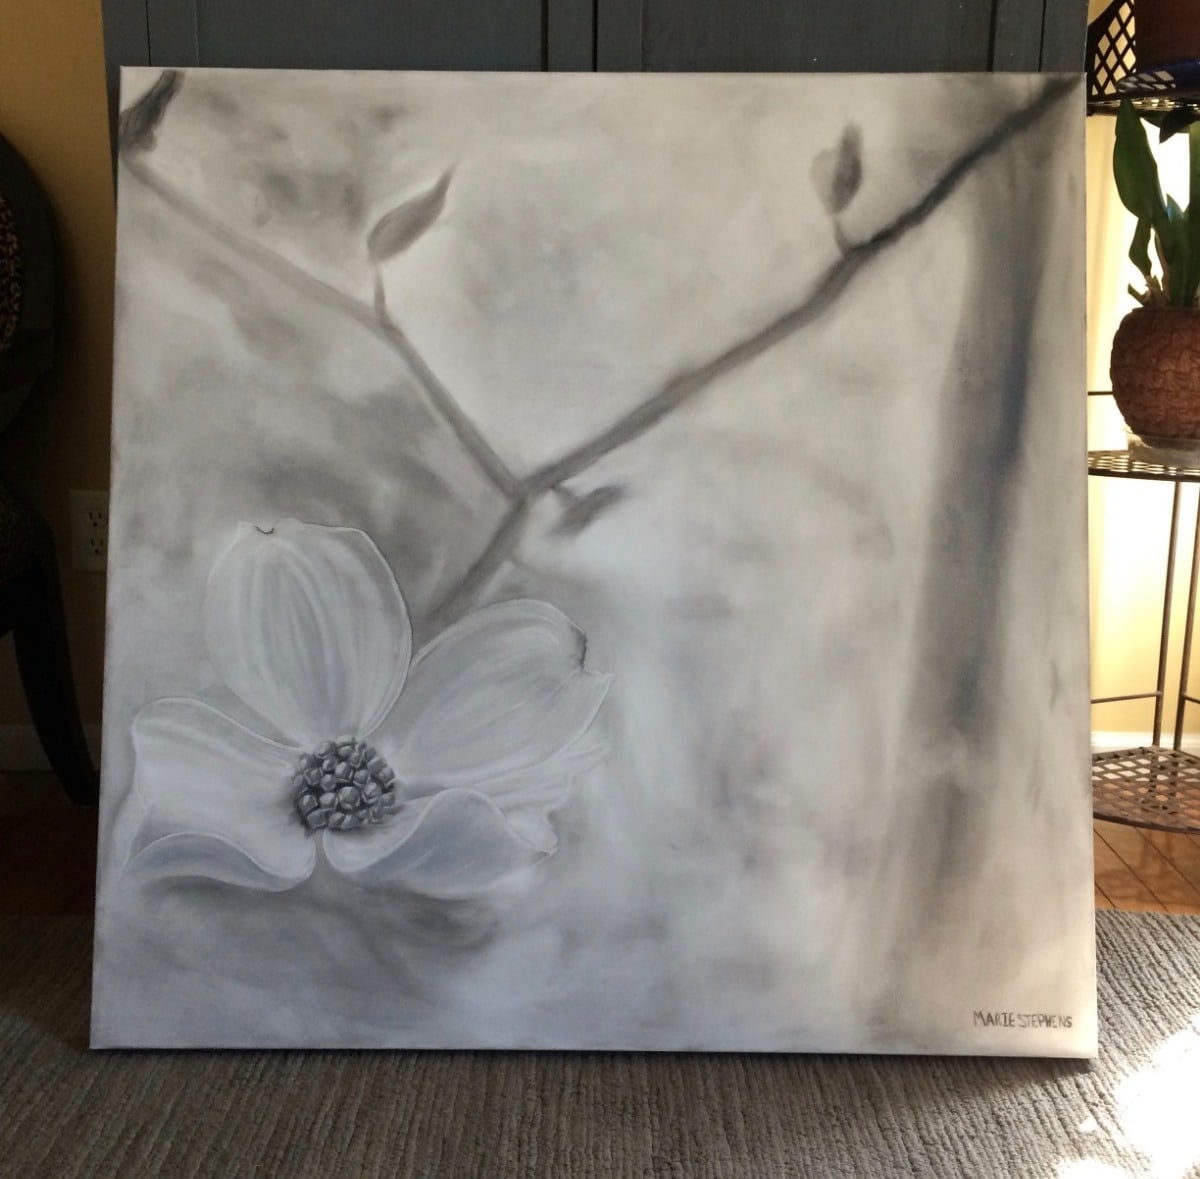 Browse multiple printing options and custom framing for this dogwood flower painting by artist, Marie Stephens